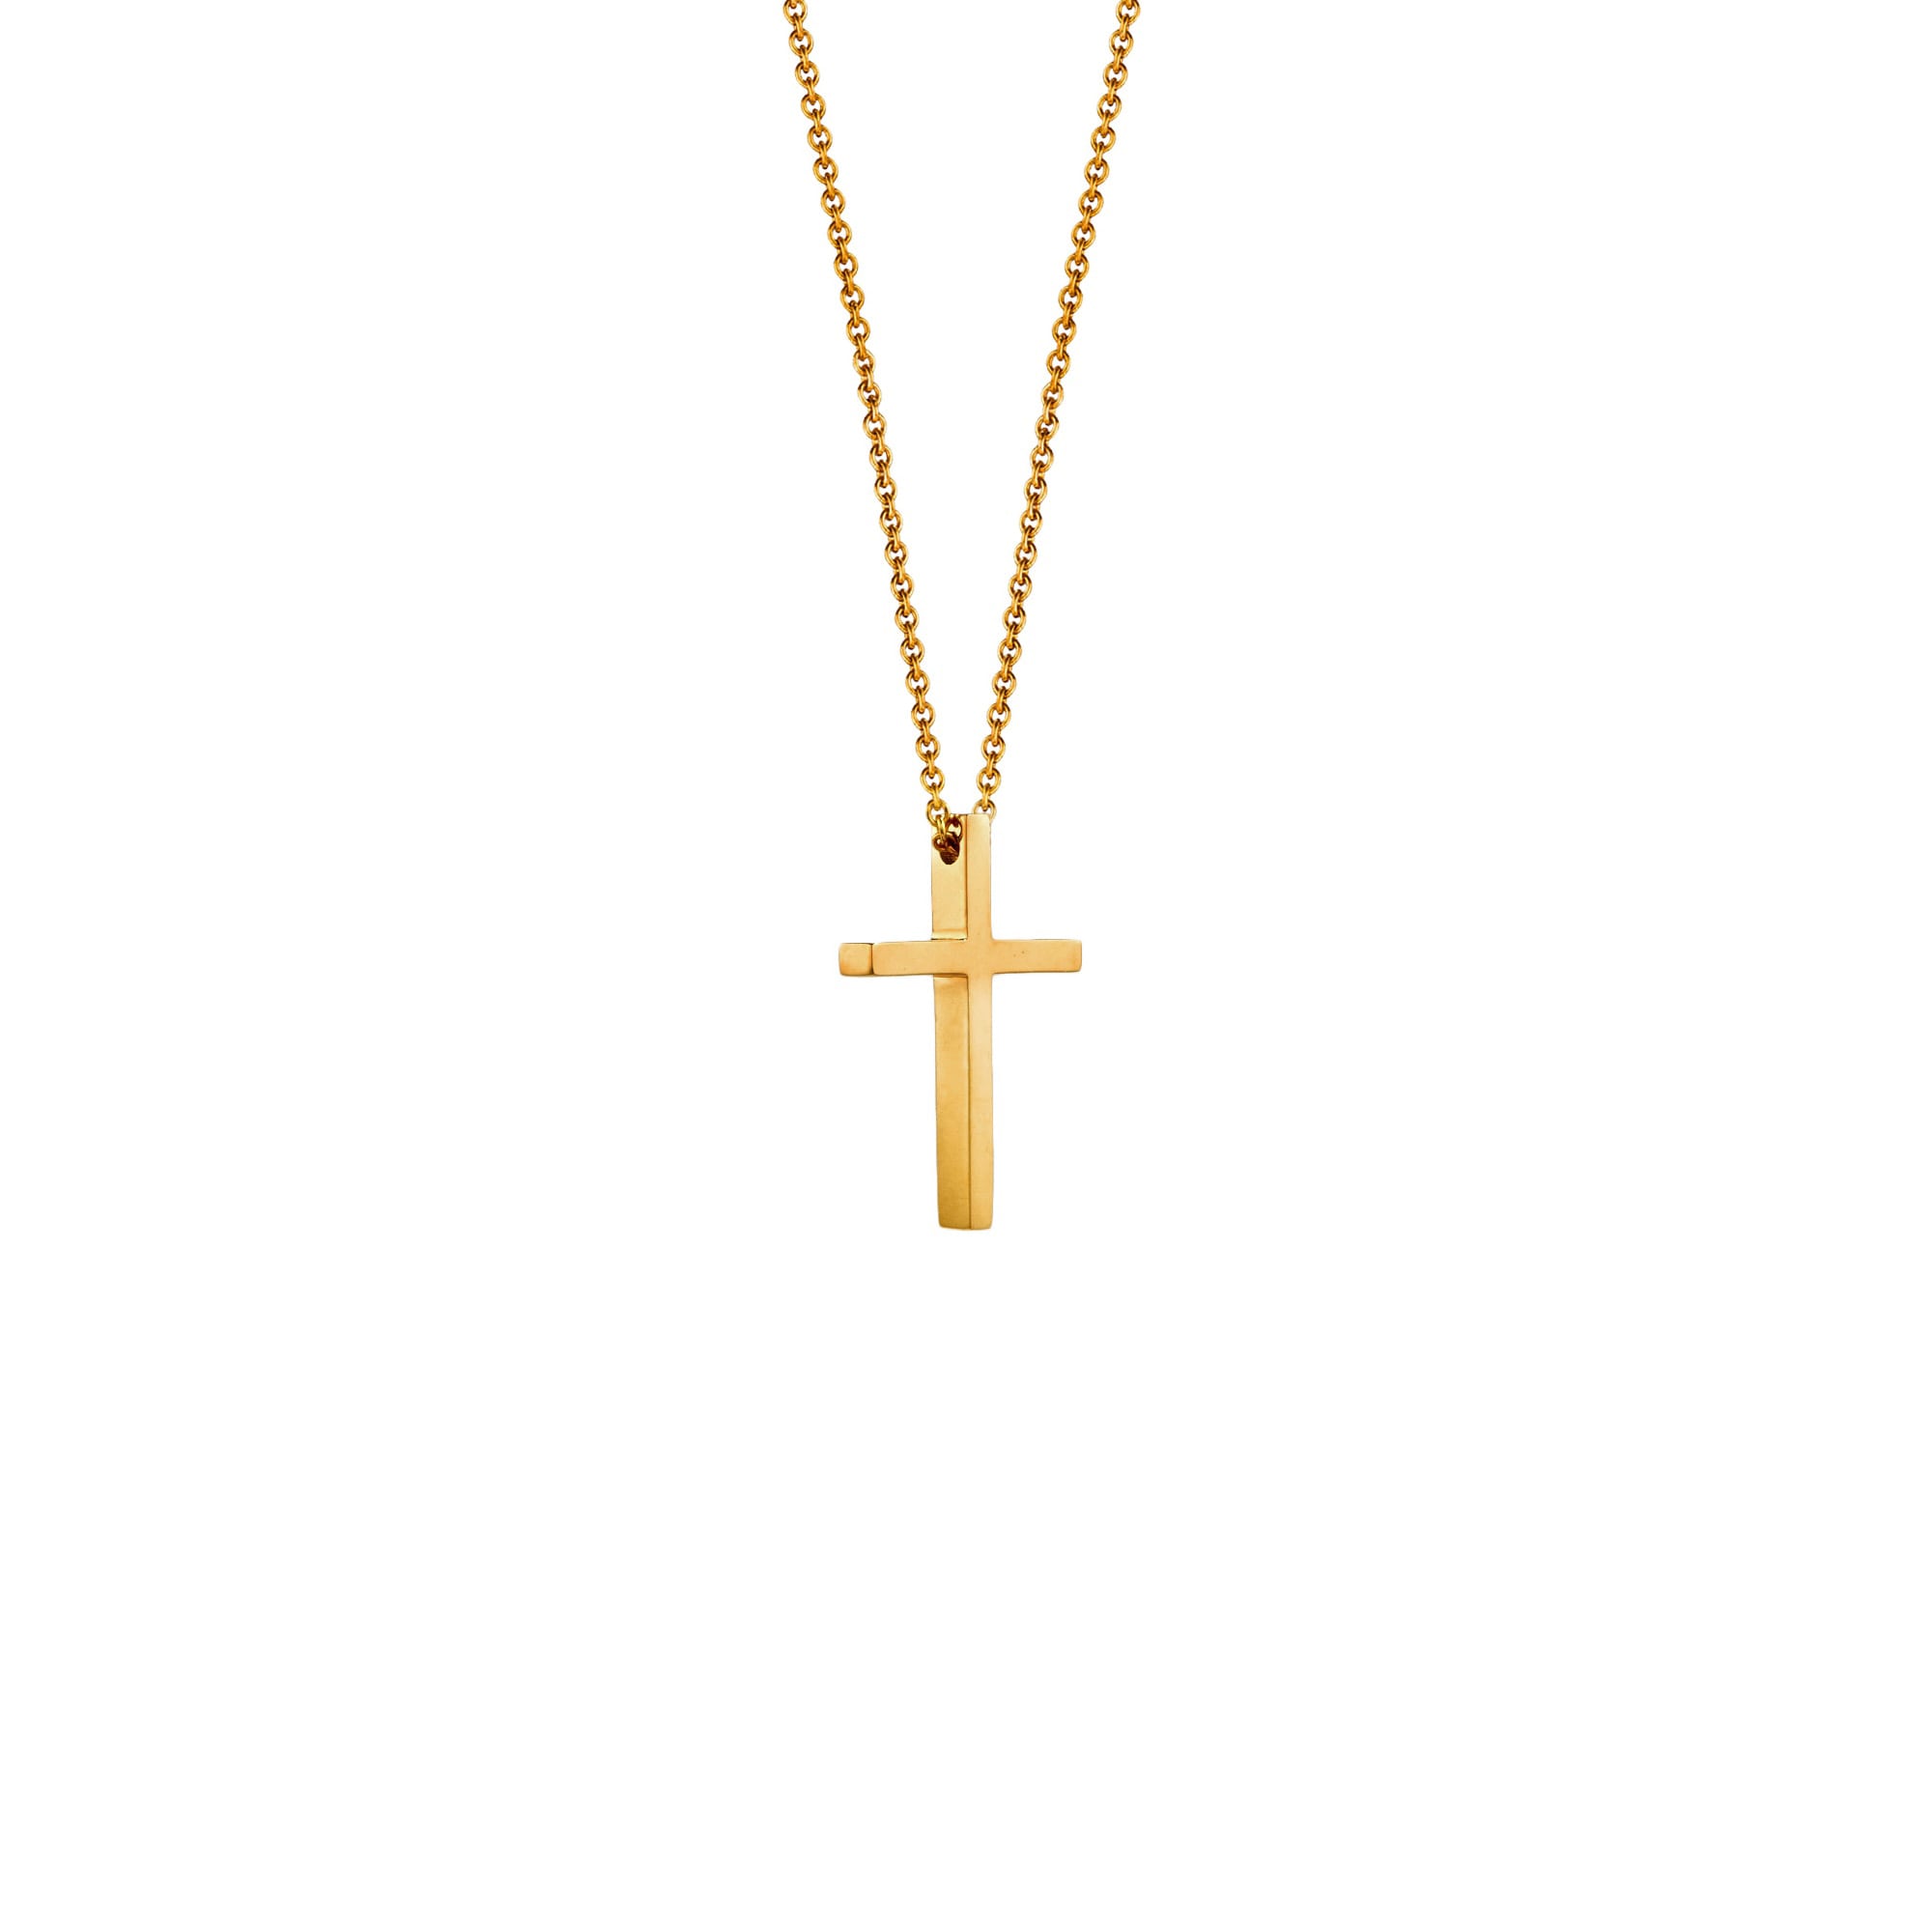 Cross Necklace, Figaro Chain, Gold Filled Necklace, Necklace With Cross, Gold  Cross Necklace, Necklace for Men, Everyday Necklace, Unisex - Etsy | Gold  cross necklace, Gold fill necklace, Necklace